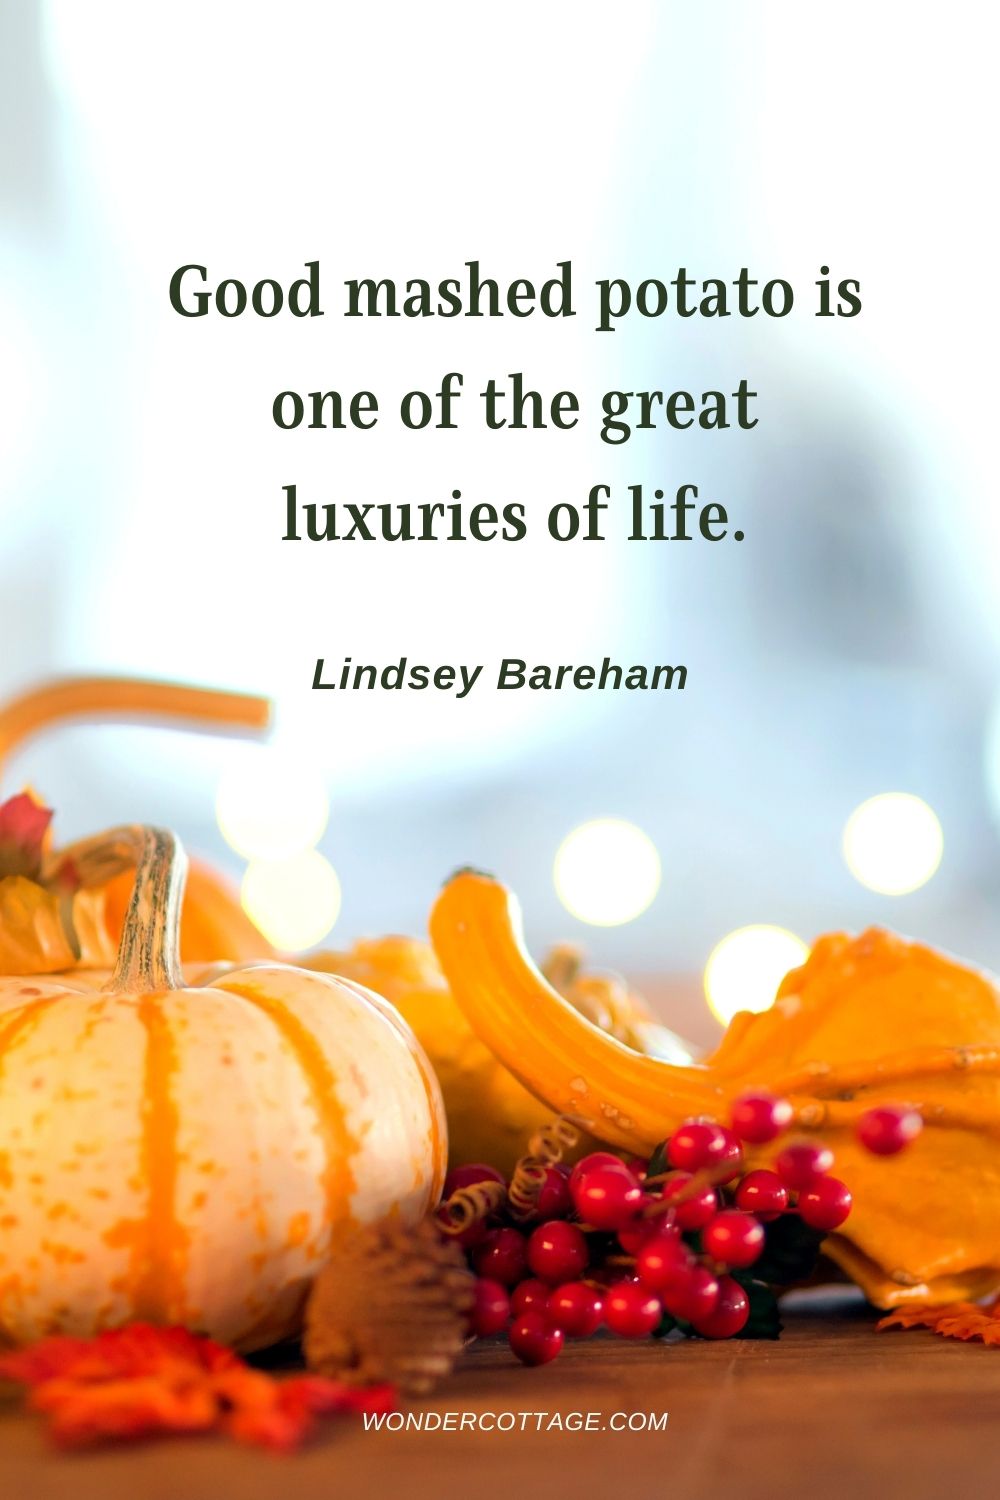 Good mashed potato is one of the great luxuries of life. Lindsey Bareham - Thanksgiving Quotes With Images